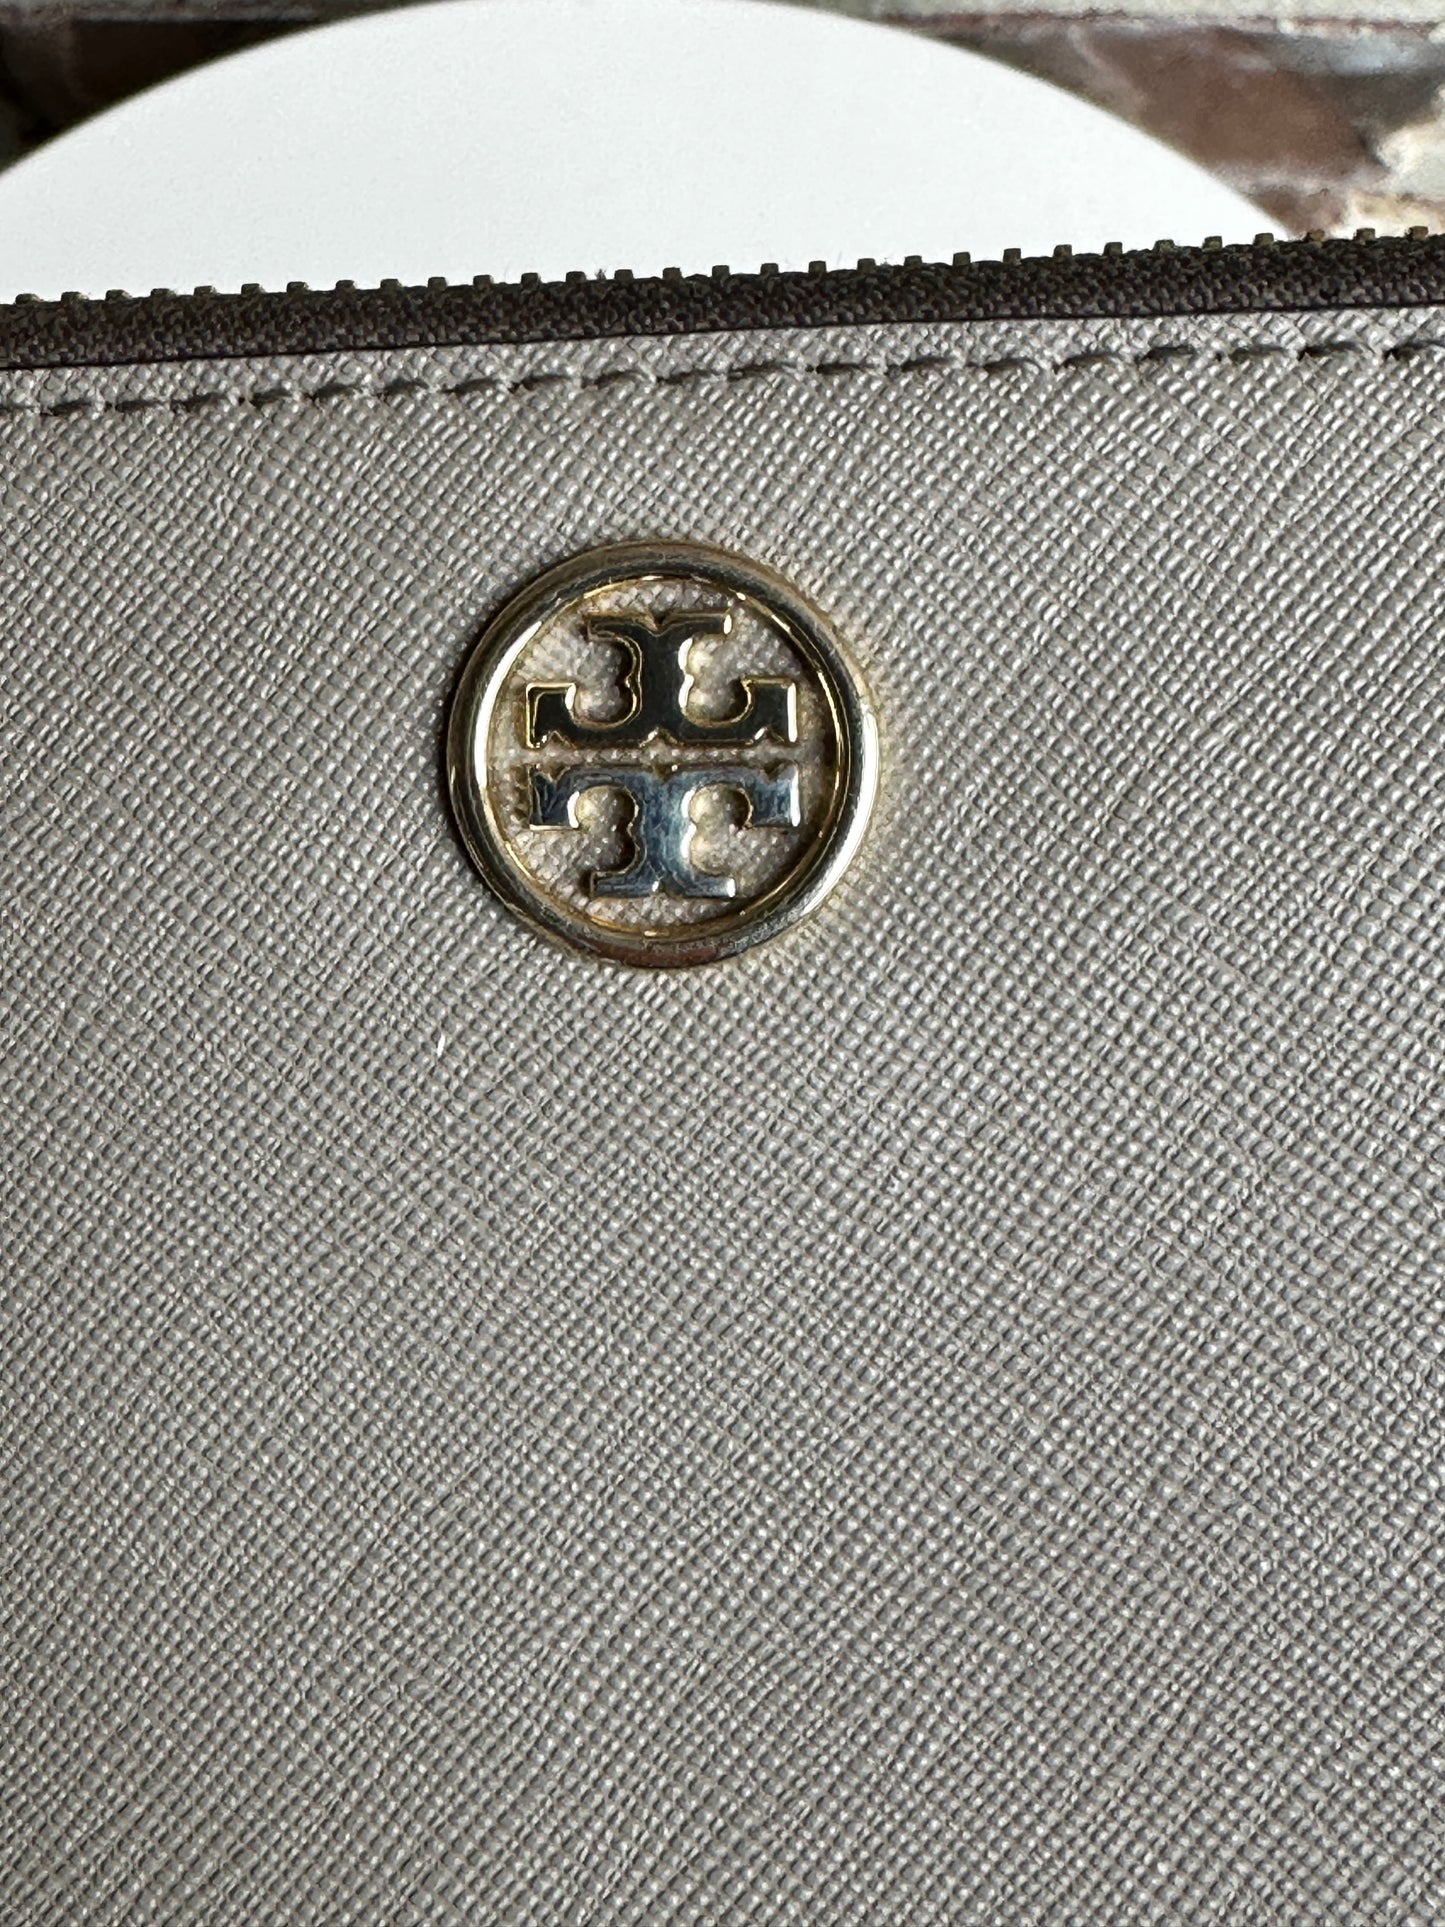 Tory Burch Leather Continental Wallet